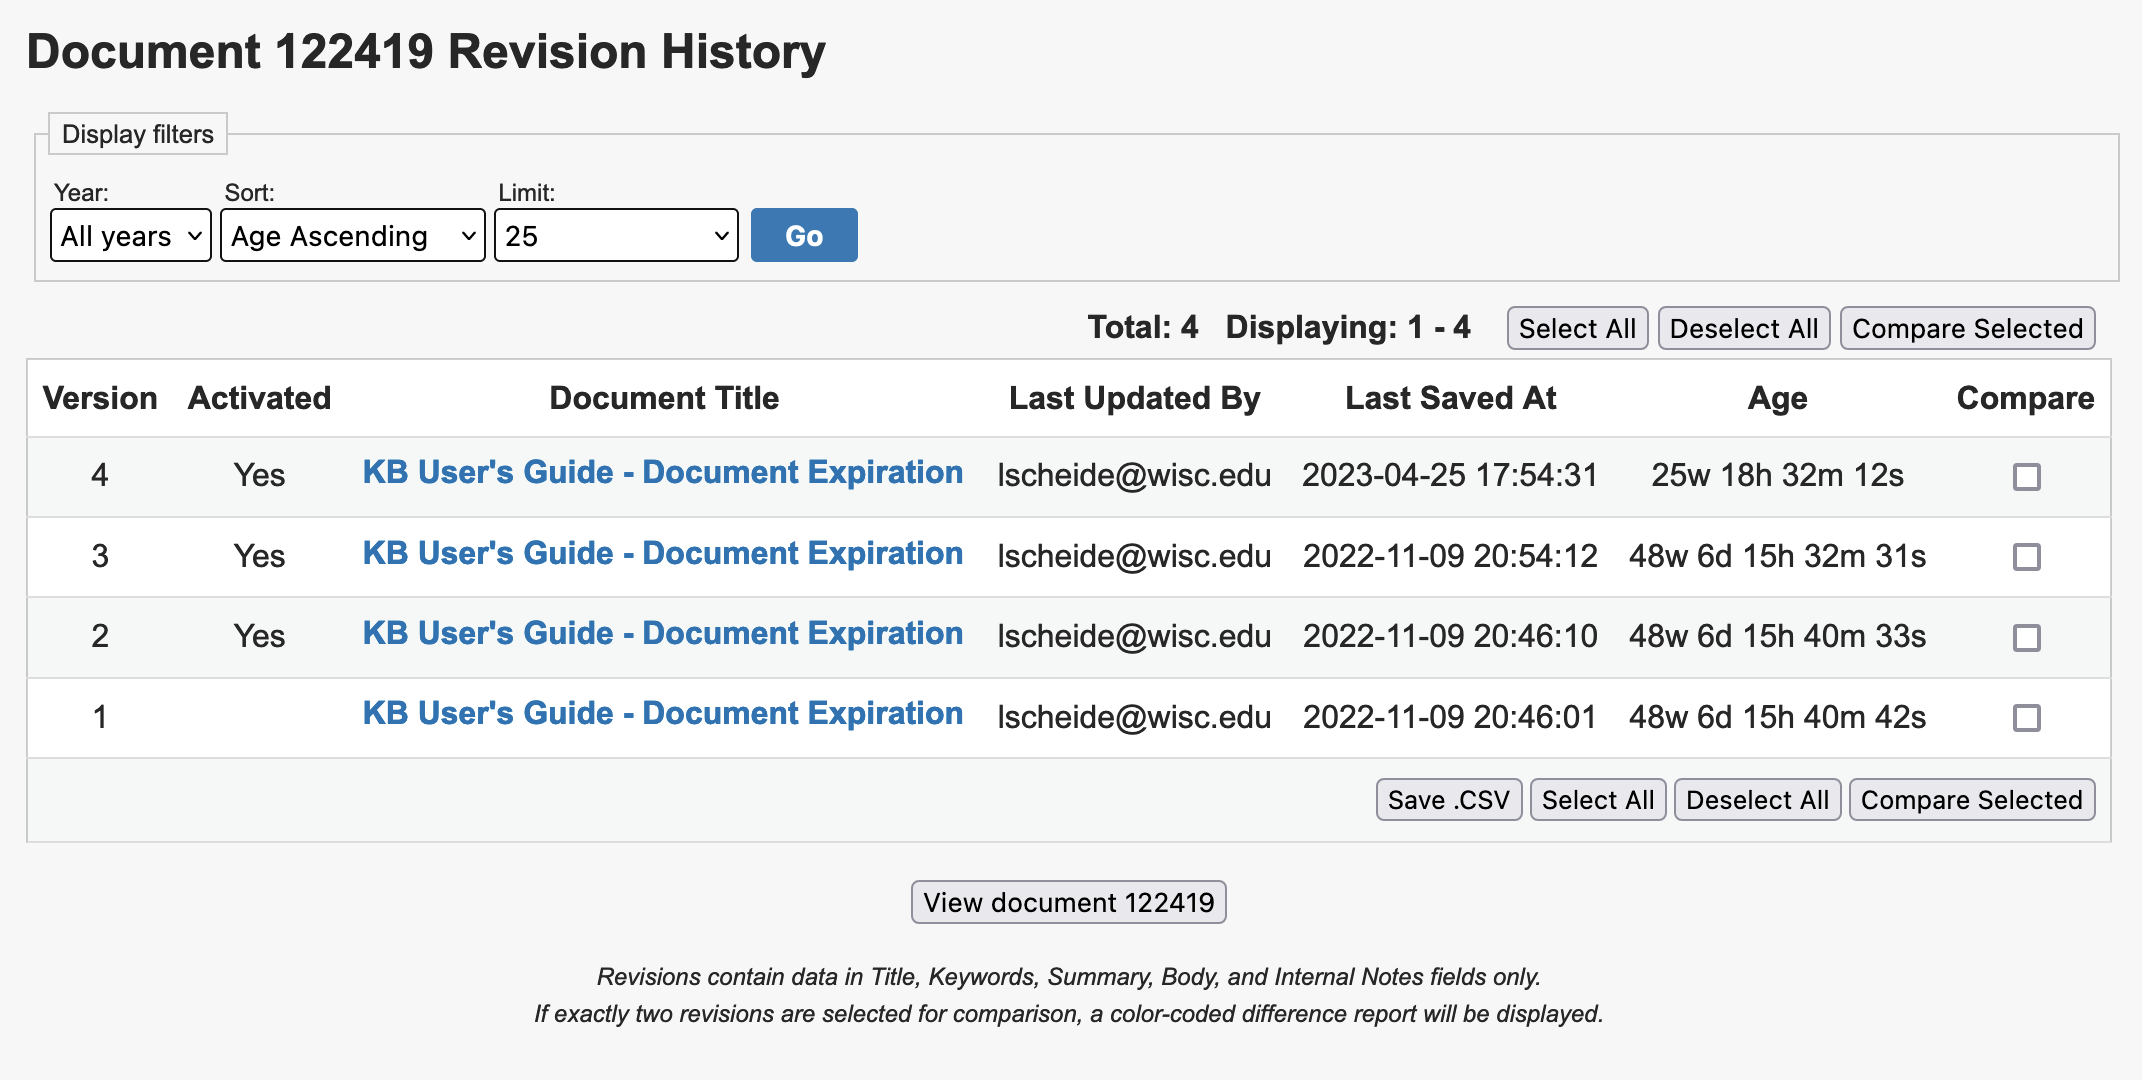 The revision history will be presented as a table, where each row is a saved version.